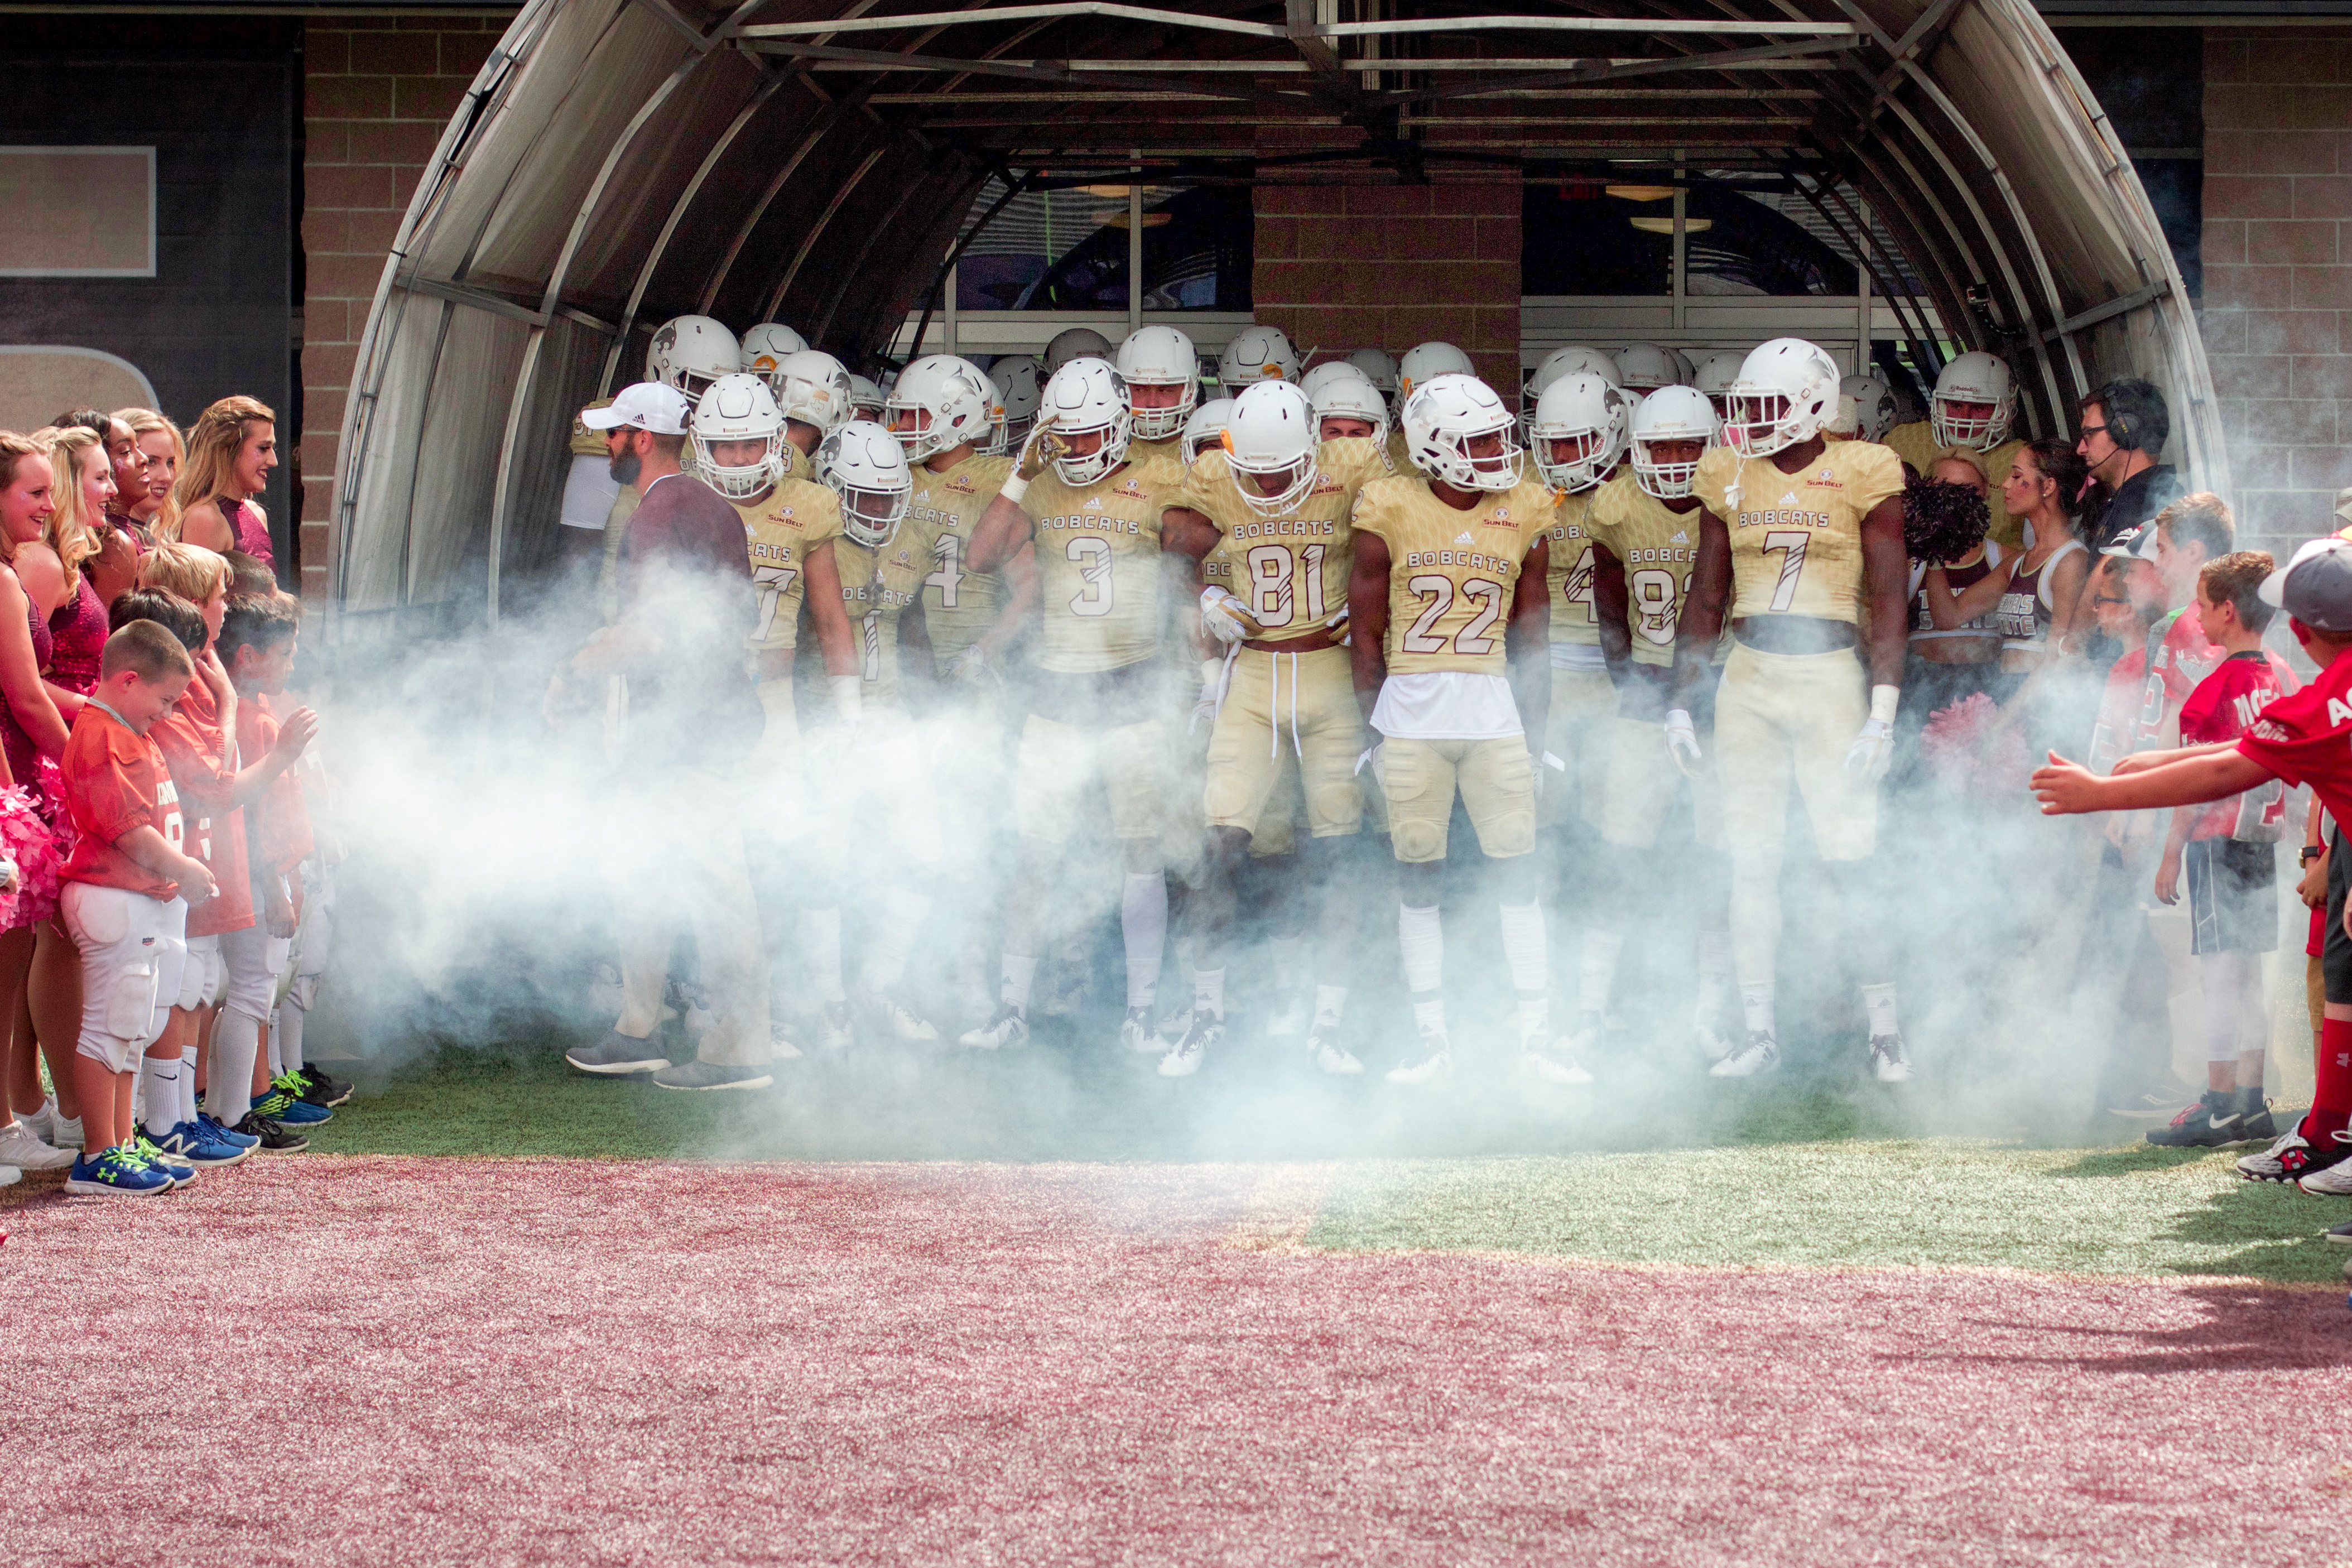 In their bright golden jerseys, the Texas State Bobcat Football team prepares to rush out of a smoke-filled tunnel to an enthusiastic home crowd. Some players look at each other, others look down, but all have rigid bodies from the tense of the situation, waiting to pour their exuberance onto the field of play.